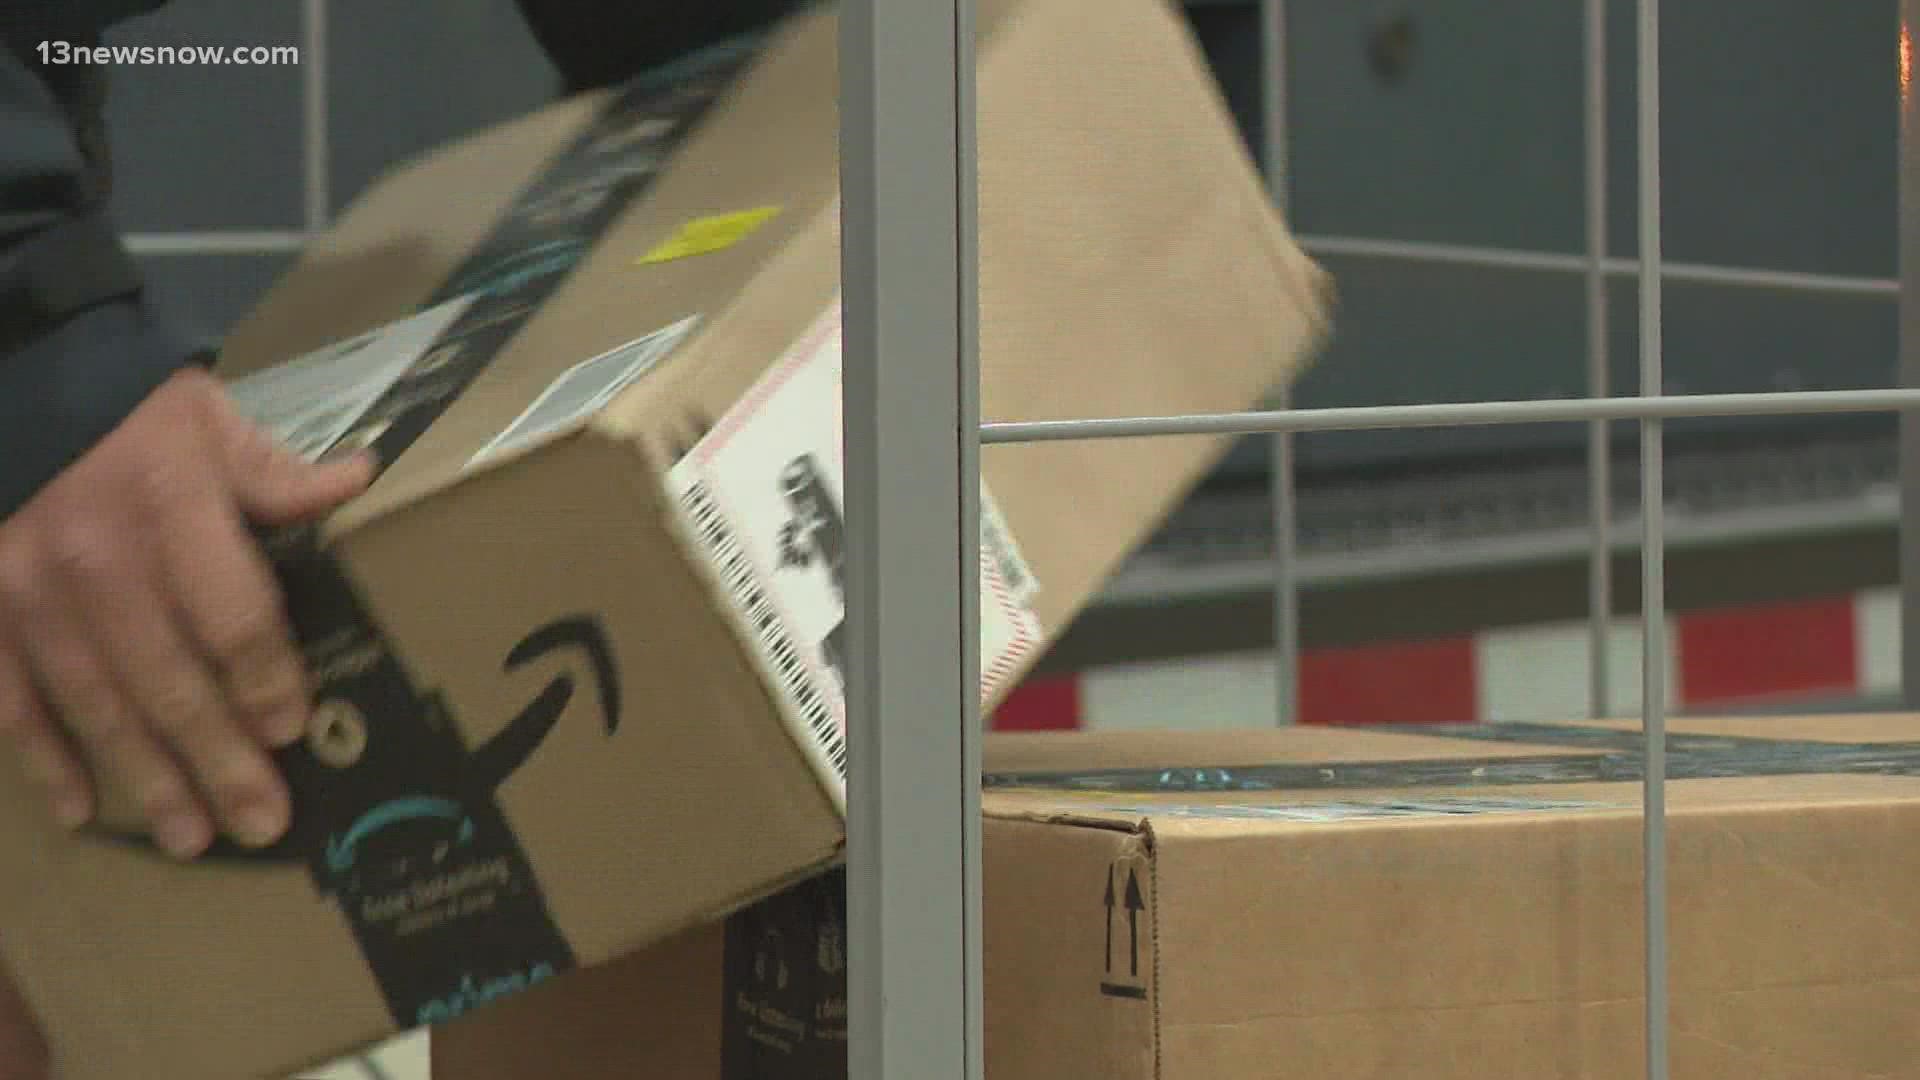 Amazon recently launched a new delivery station in Norfolk. Now the company is looking to hire thousands of employees.